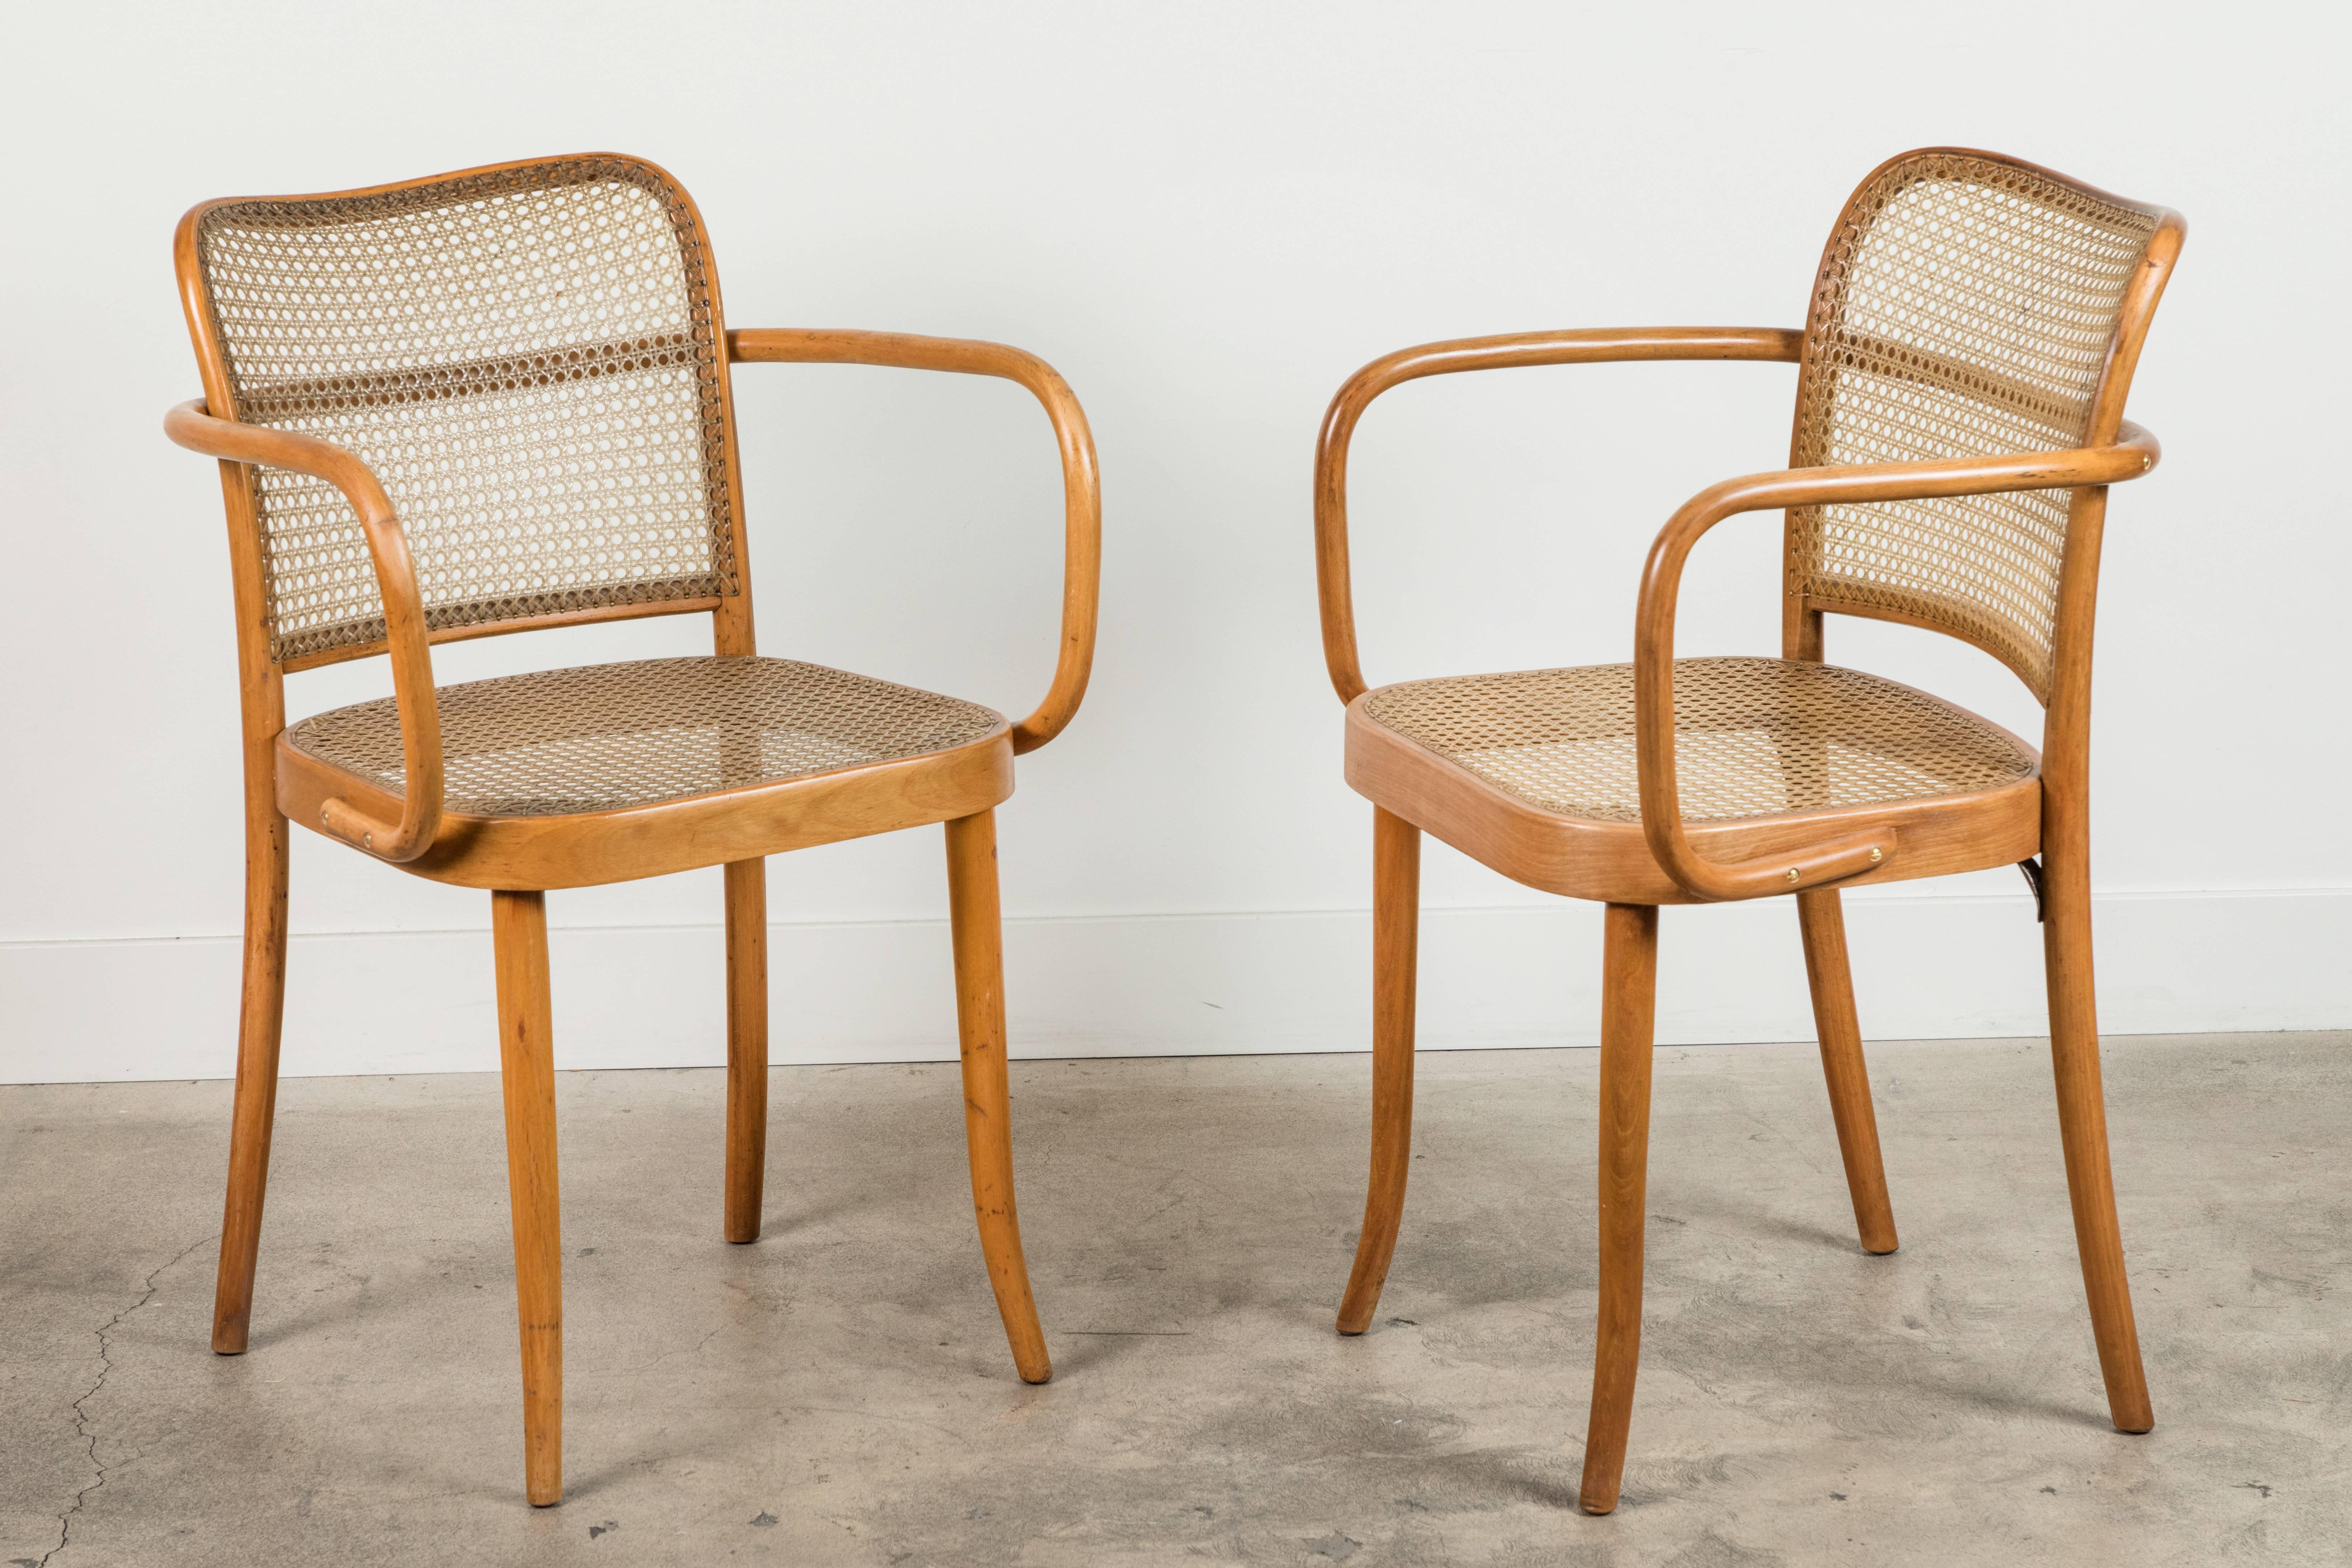 Set of six bentwood armchairs by Josef Hoffman for Stendig.